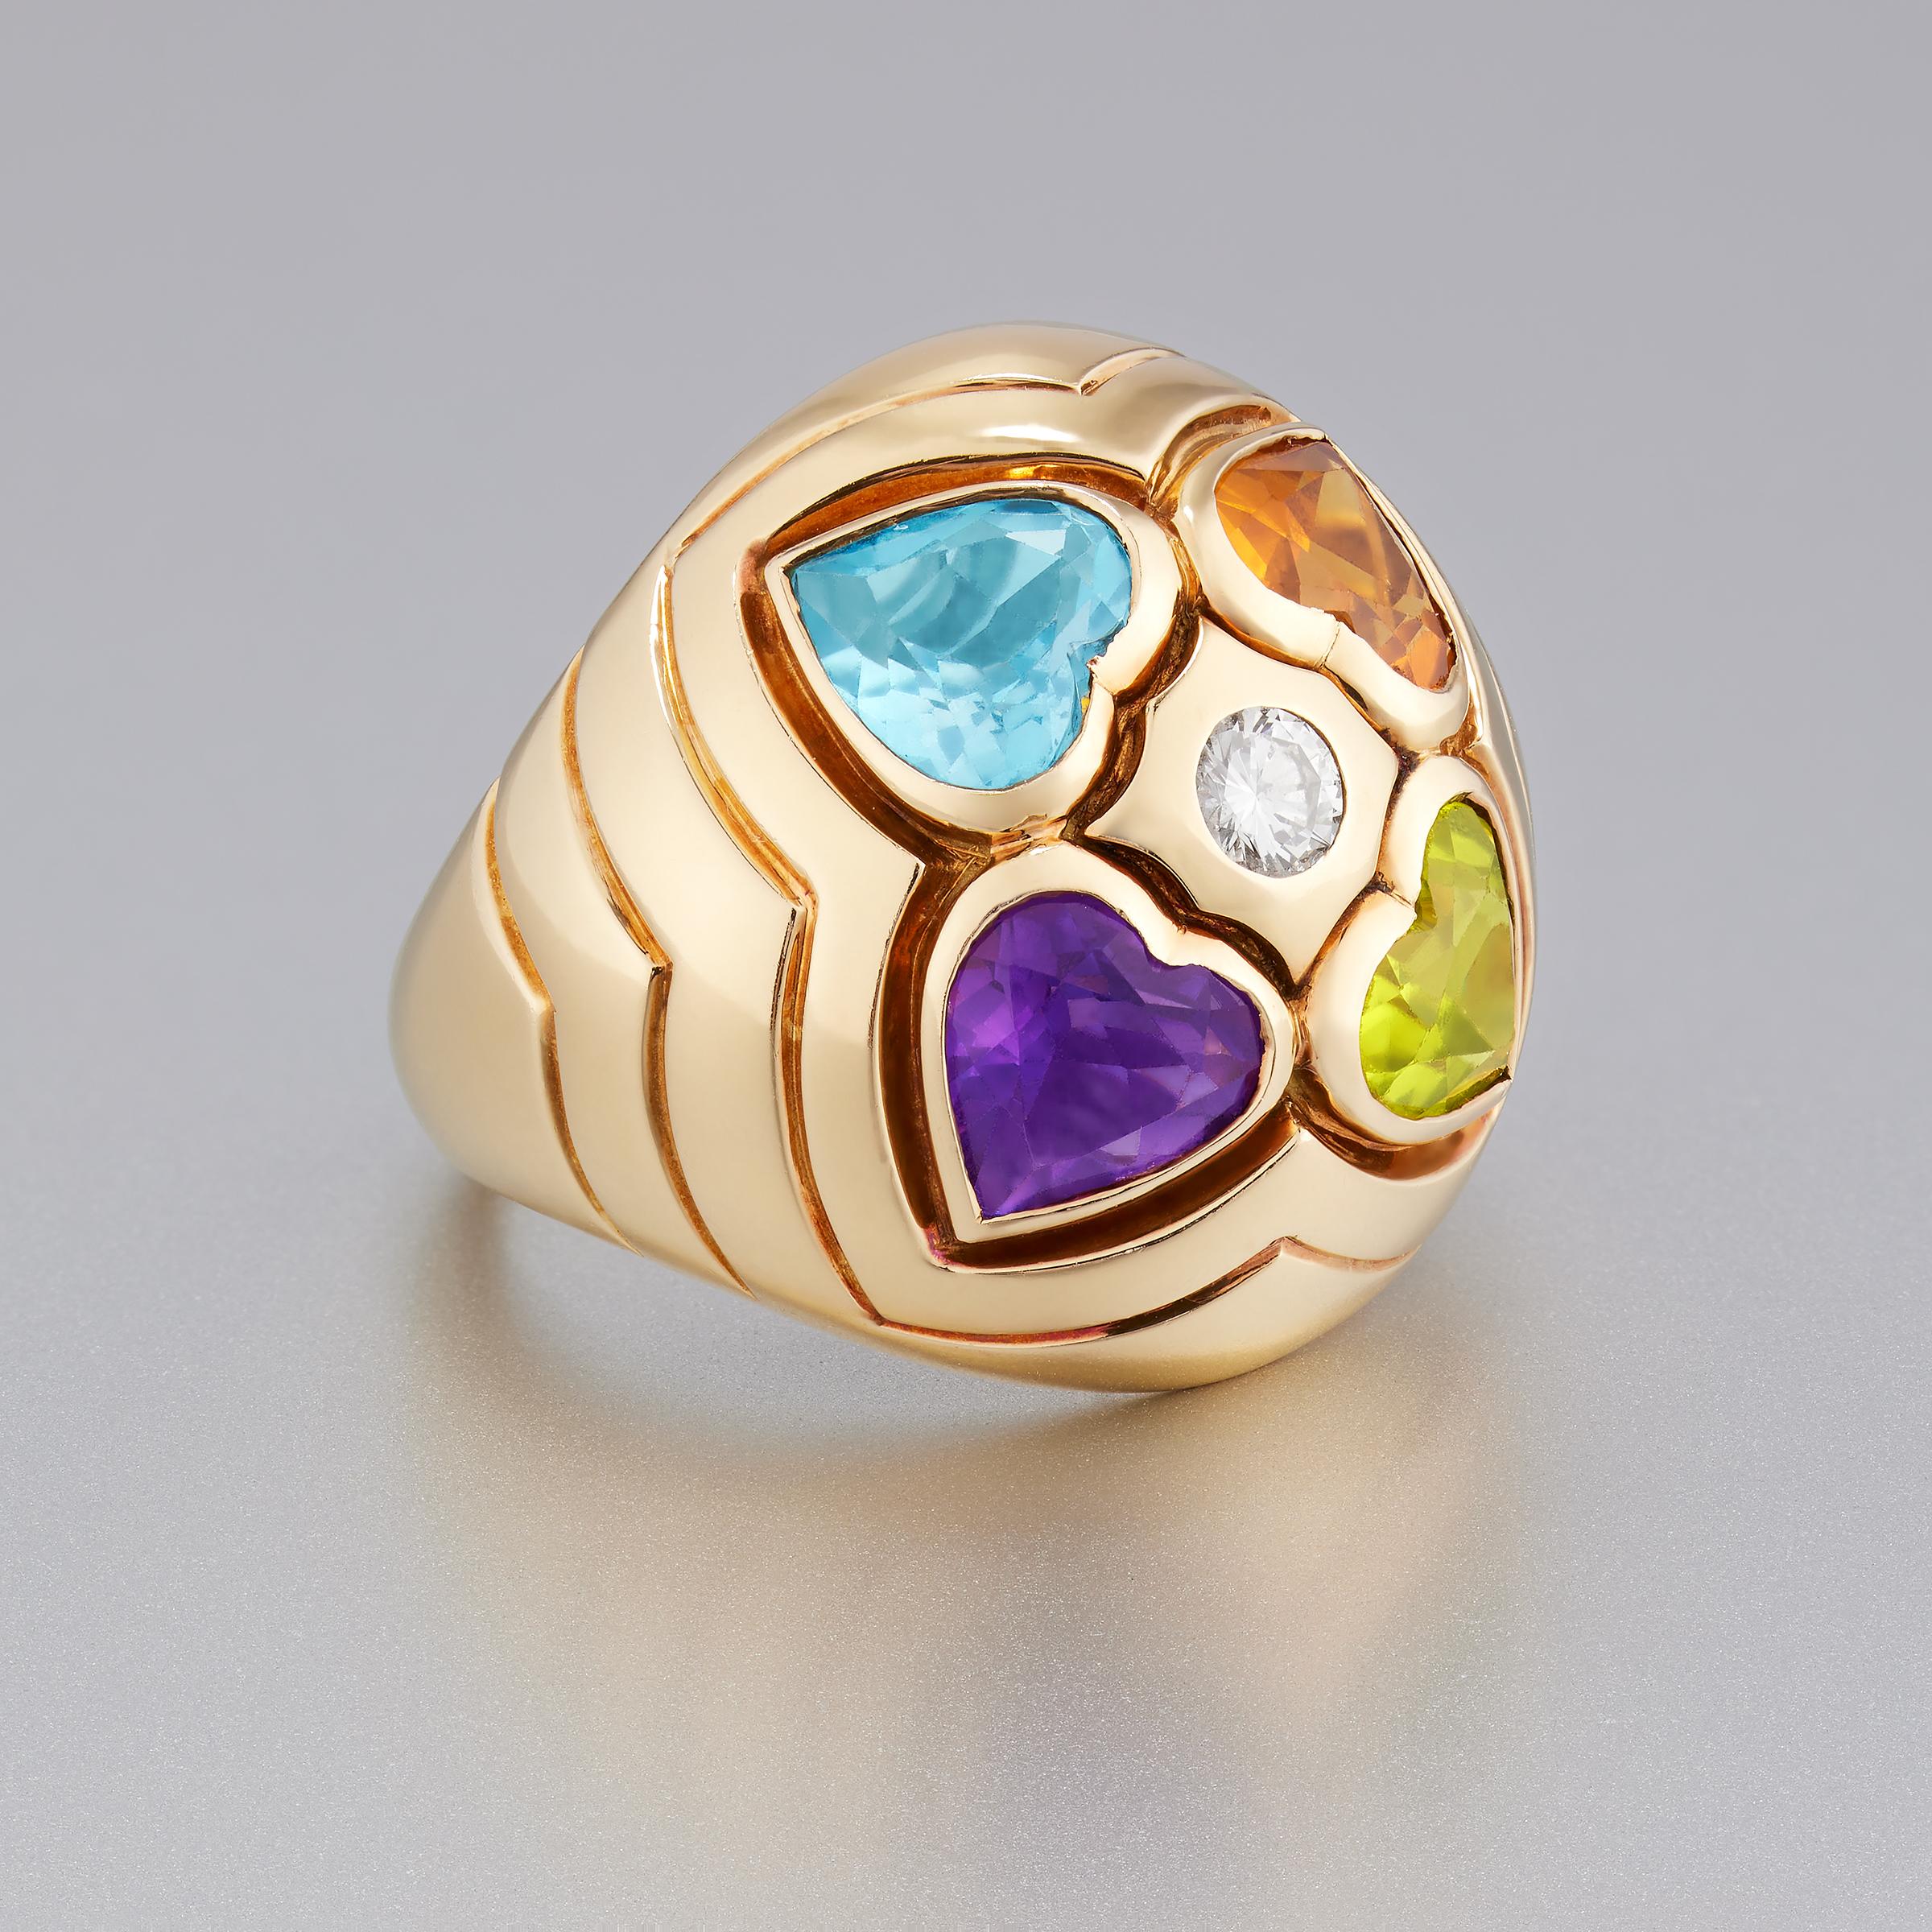 From the iconic Bulgari comes this joyous multi-colored gemstone and diamond dome ring set in 18 karat yellow gold. The ring is a perfect expression of love as its four vivid gems - which include blue topaz, amethyst, peridot, and citrine - are all